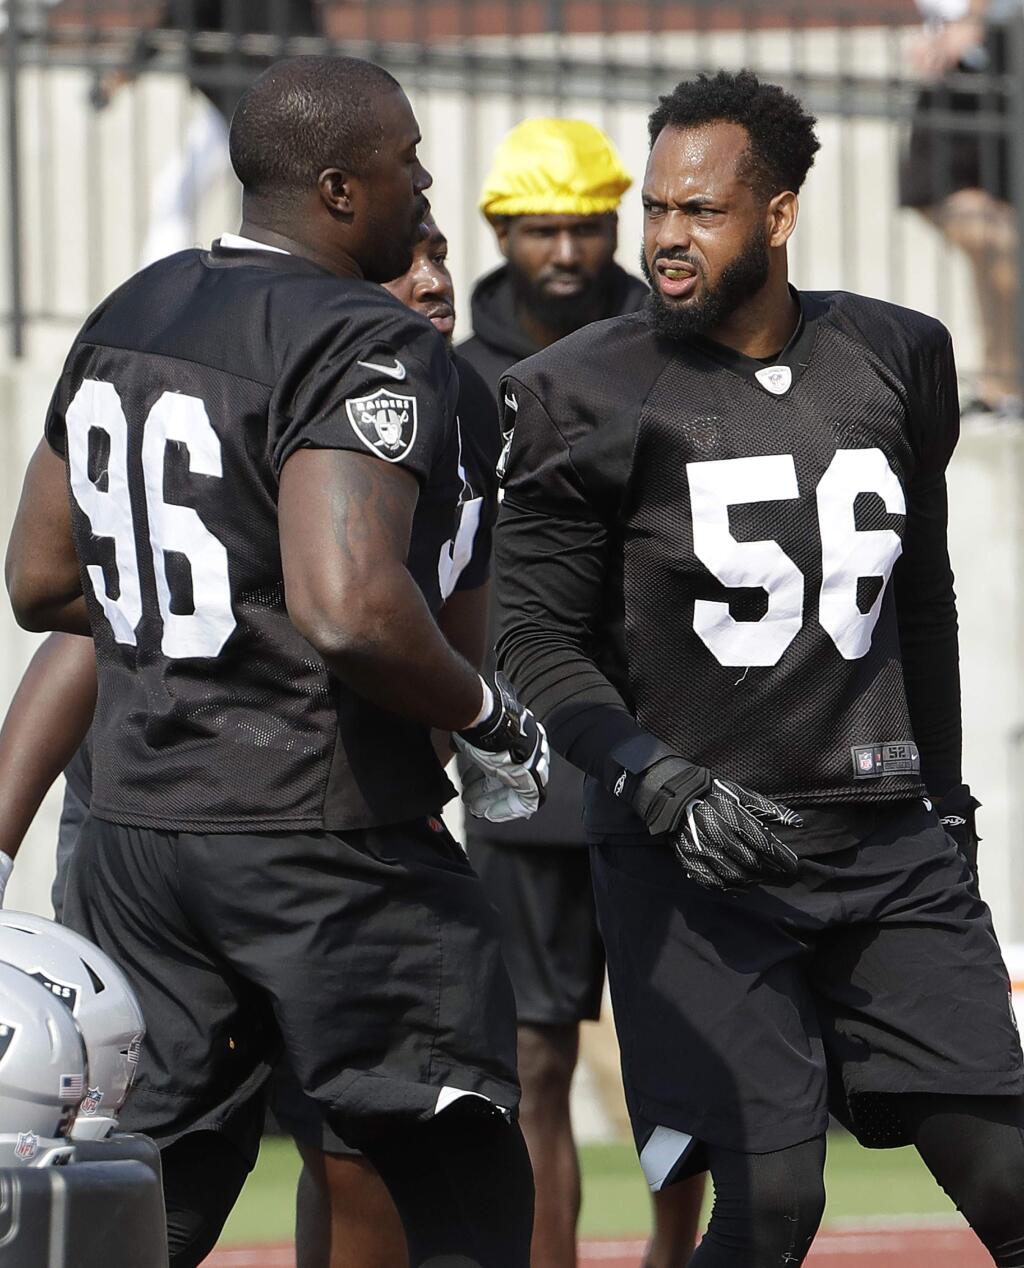 The Oakland Raiders' Tank Carradine, left, talks with Derrick Johnson, right,during practice in Napa earlier this month. (Associated Press / Jeff Chiu)